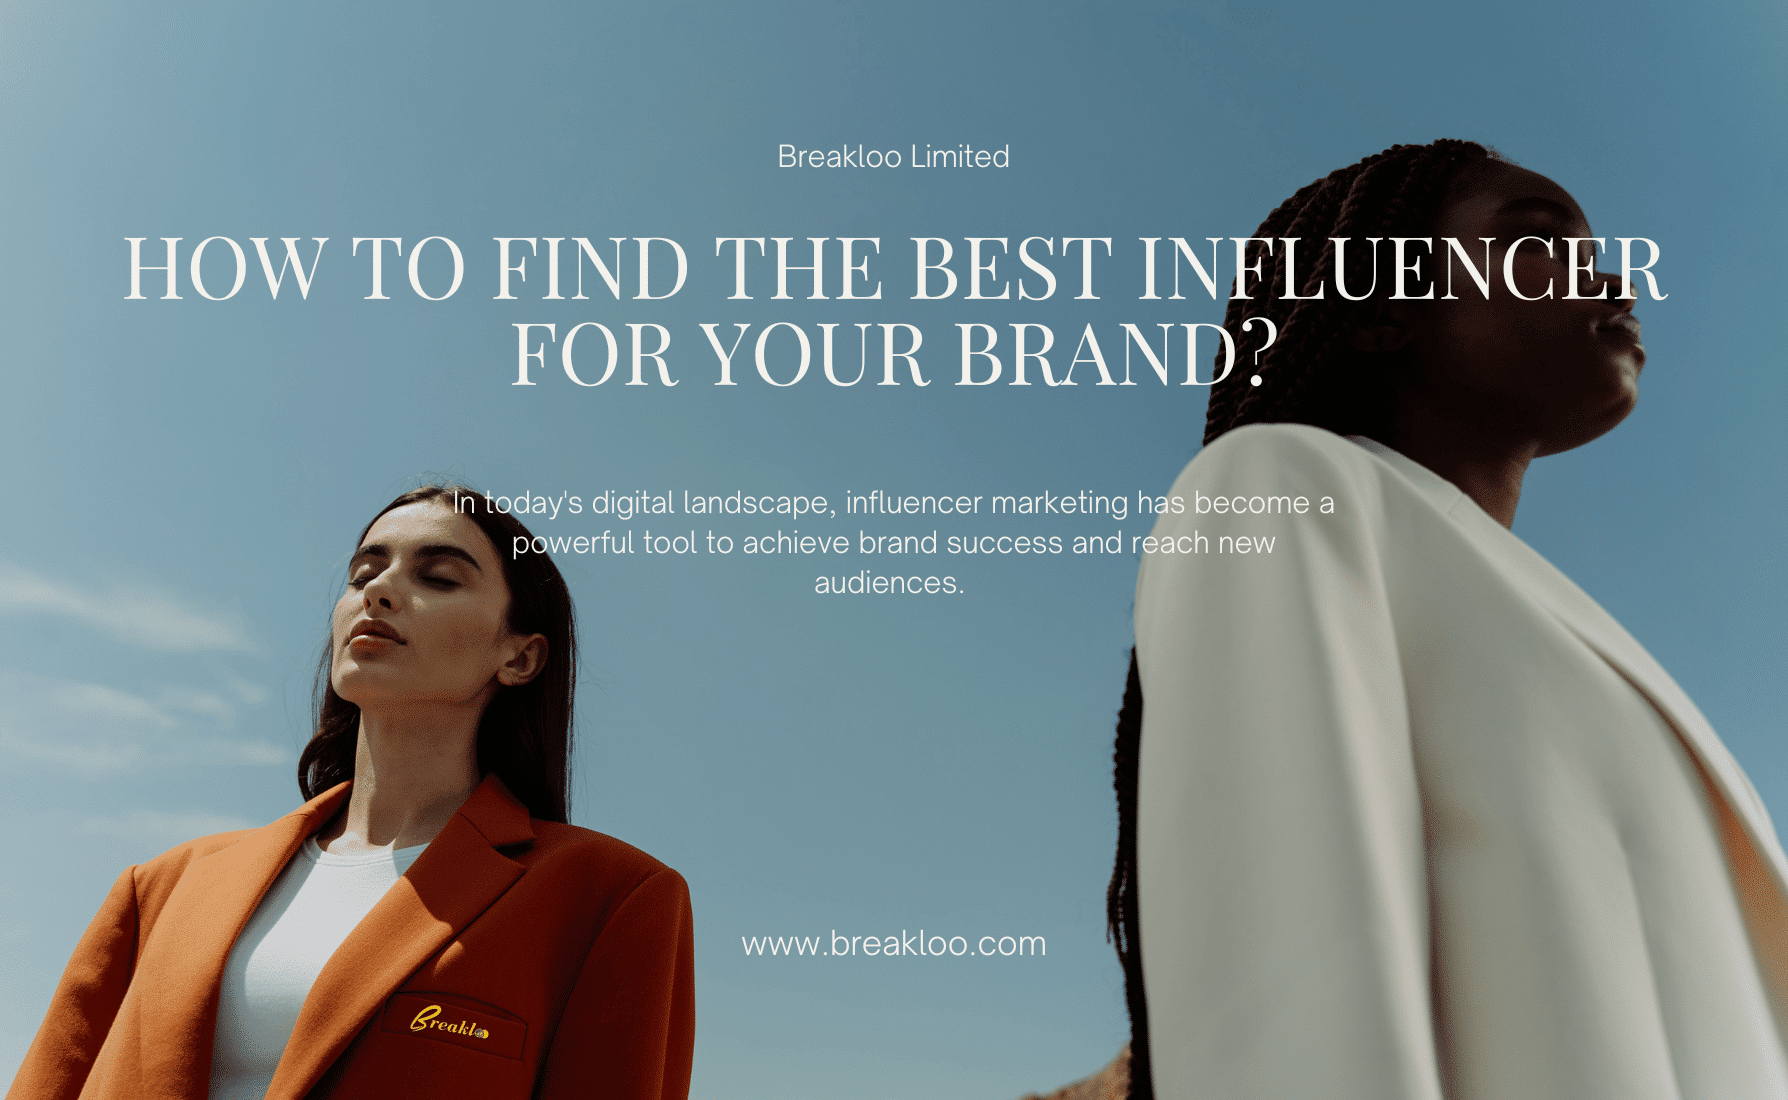 How to Find the Best Influencer for Your Brand